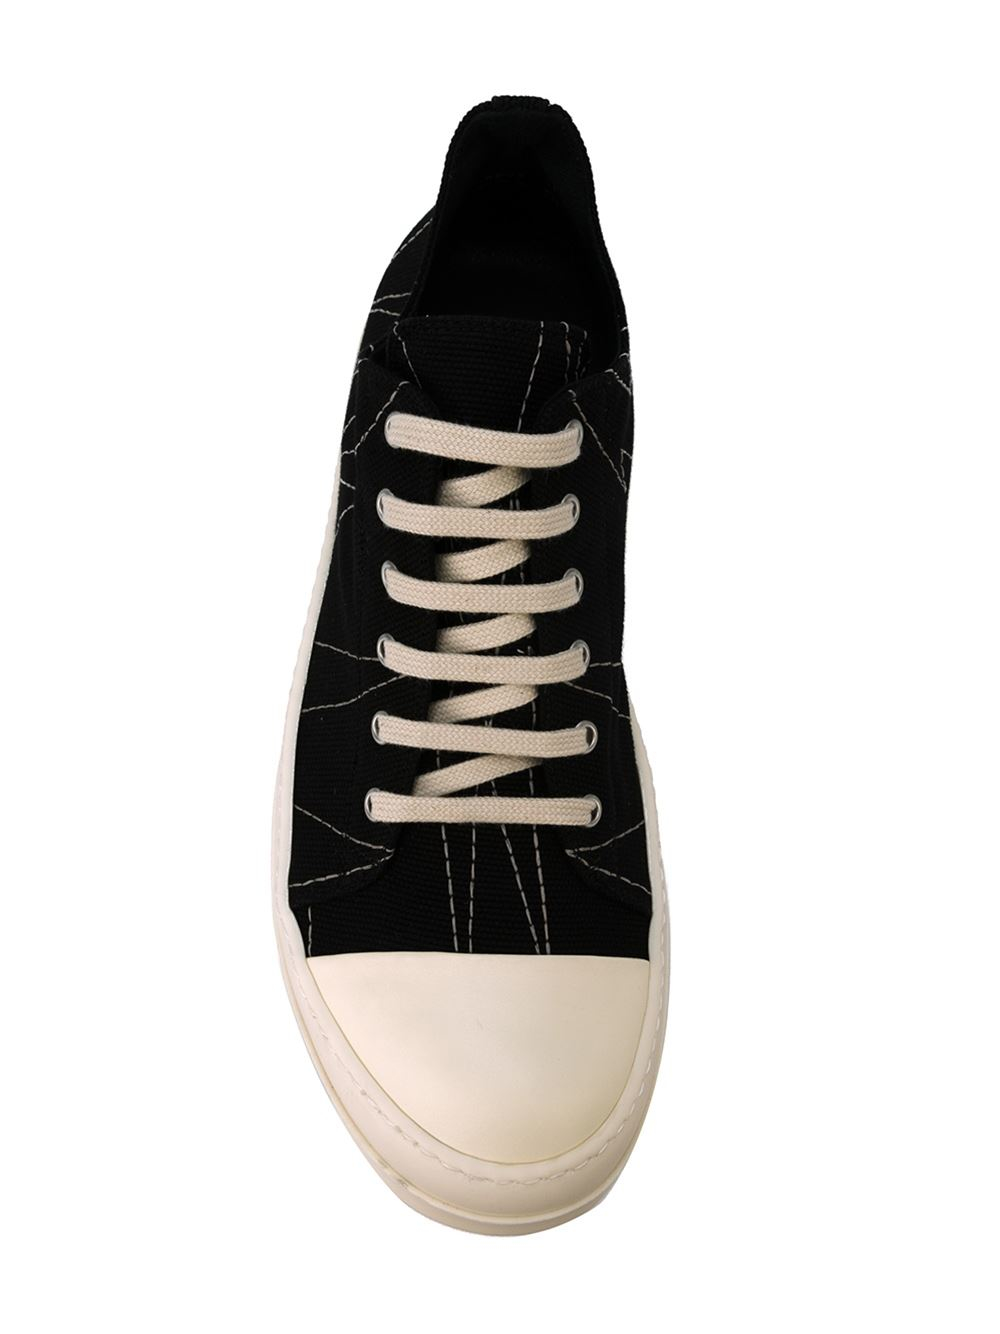 Lyst - Drkshdw By Rick Owens Stitch-Detail Mid-Top Sneakers in Black ...